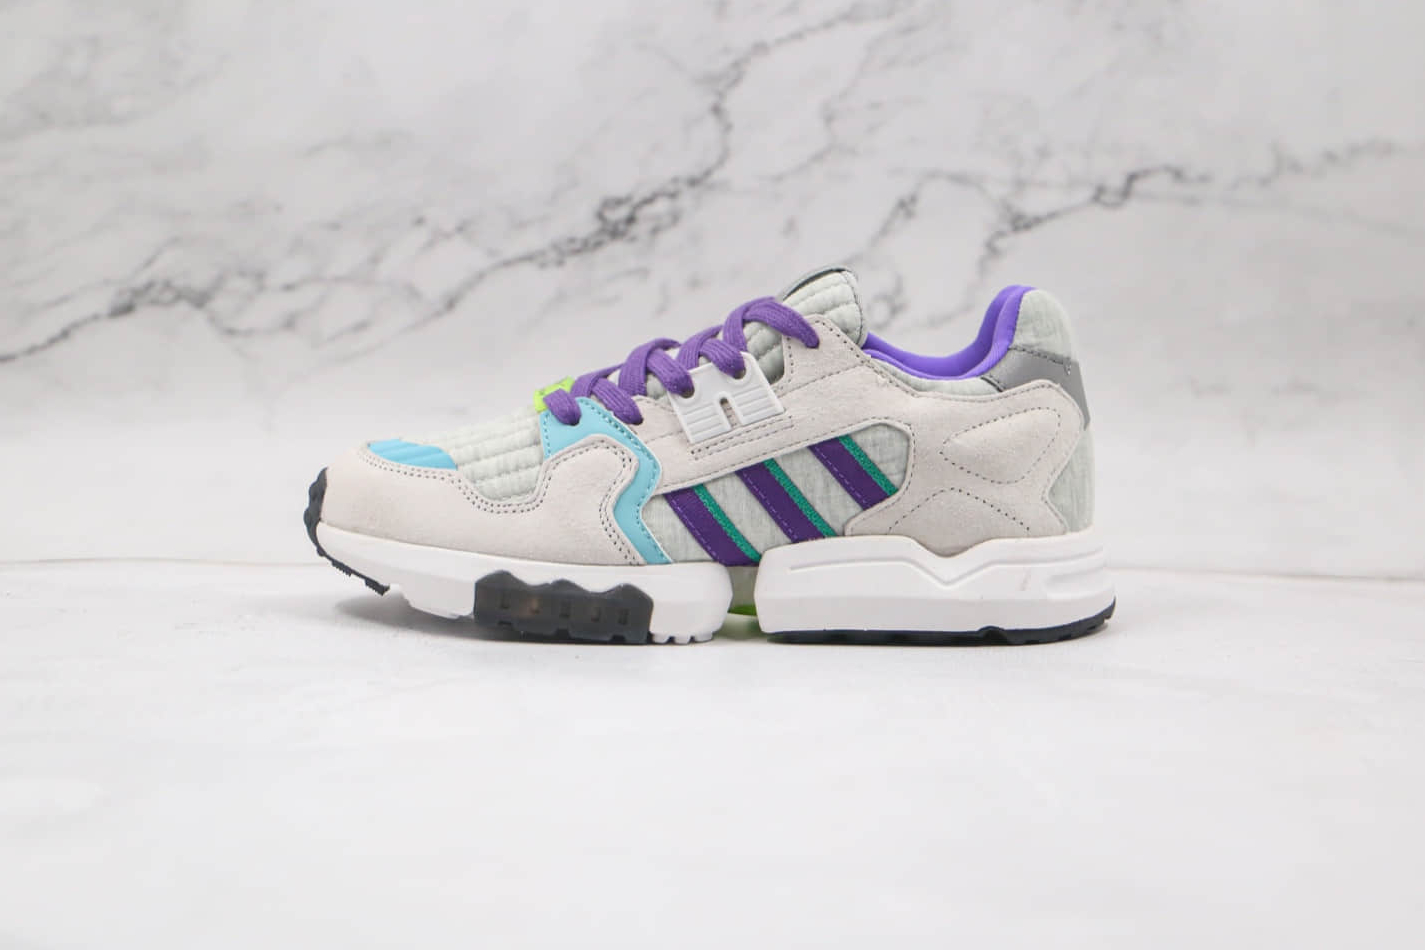 Adidas ZX Torsion Light Bone Brigade Blue Purple EF4388 - Stylish and Functional Sneakers